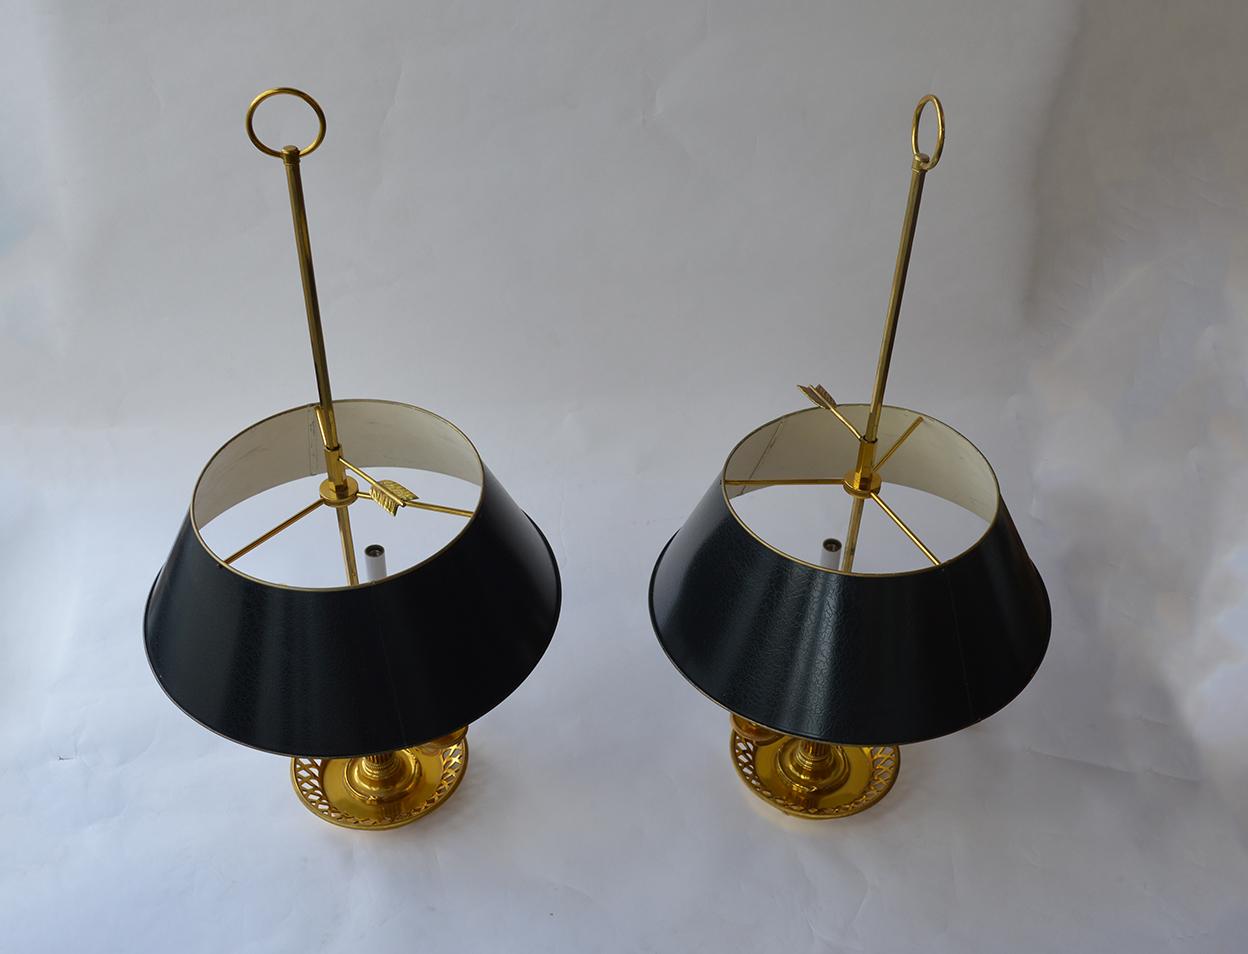 Two brass lamps with painted tole lampshades.